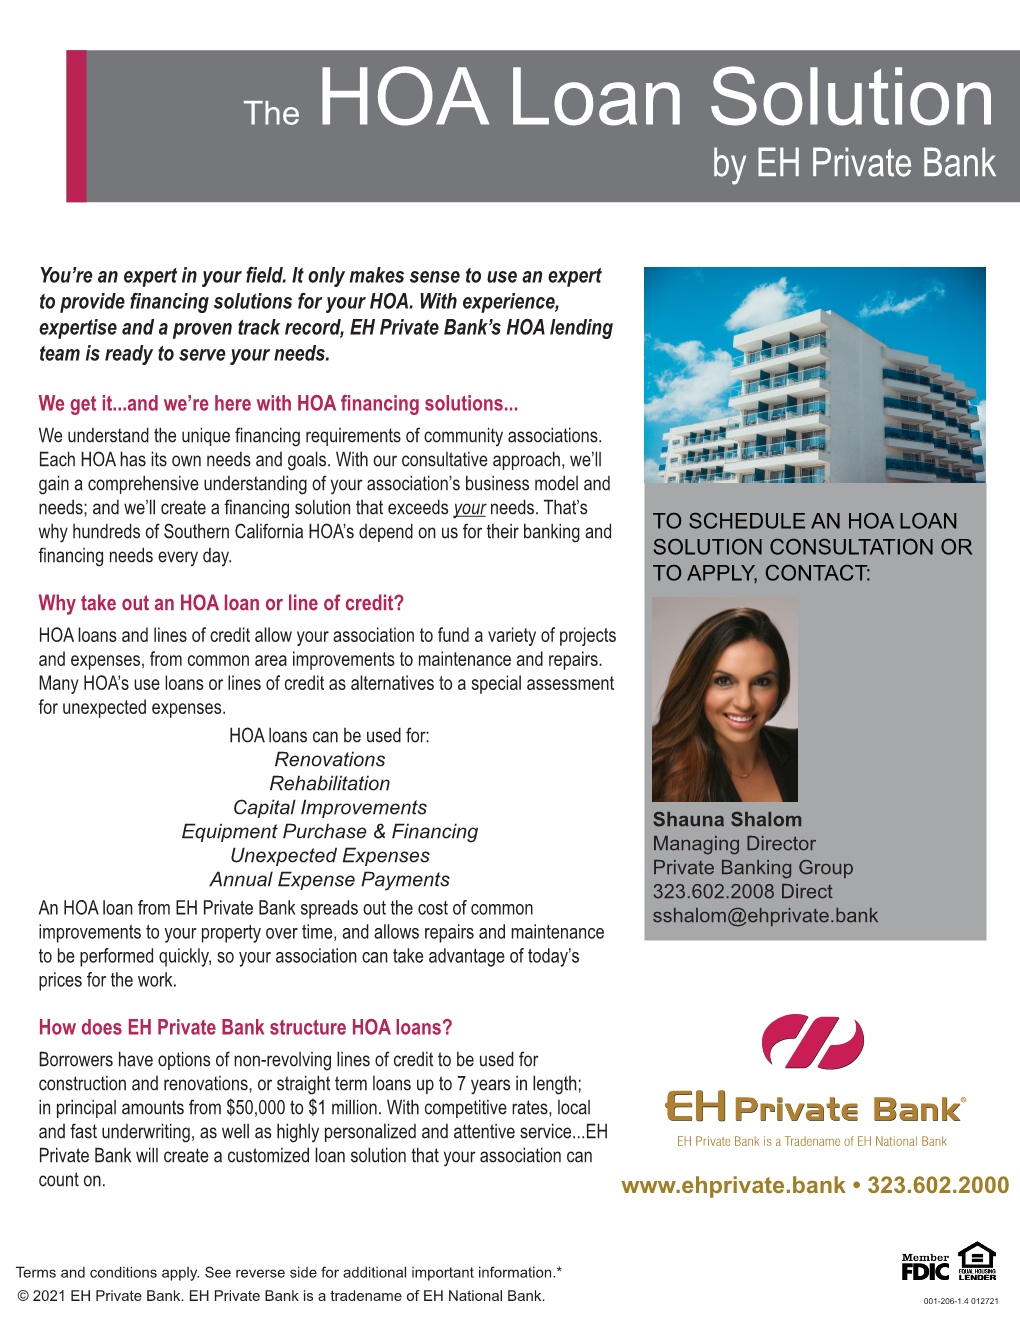 The HOA Loan Solution by EH Private Bank